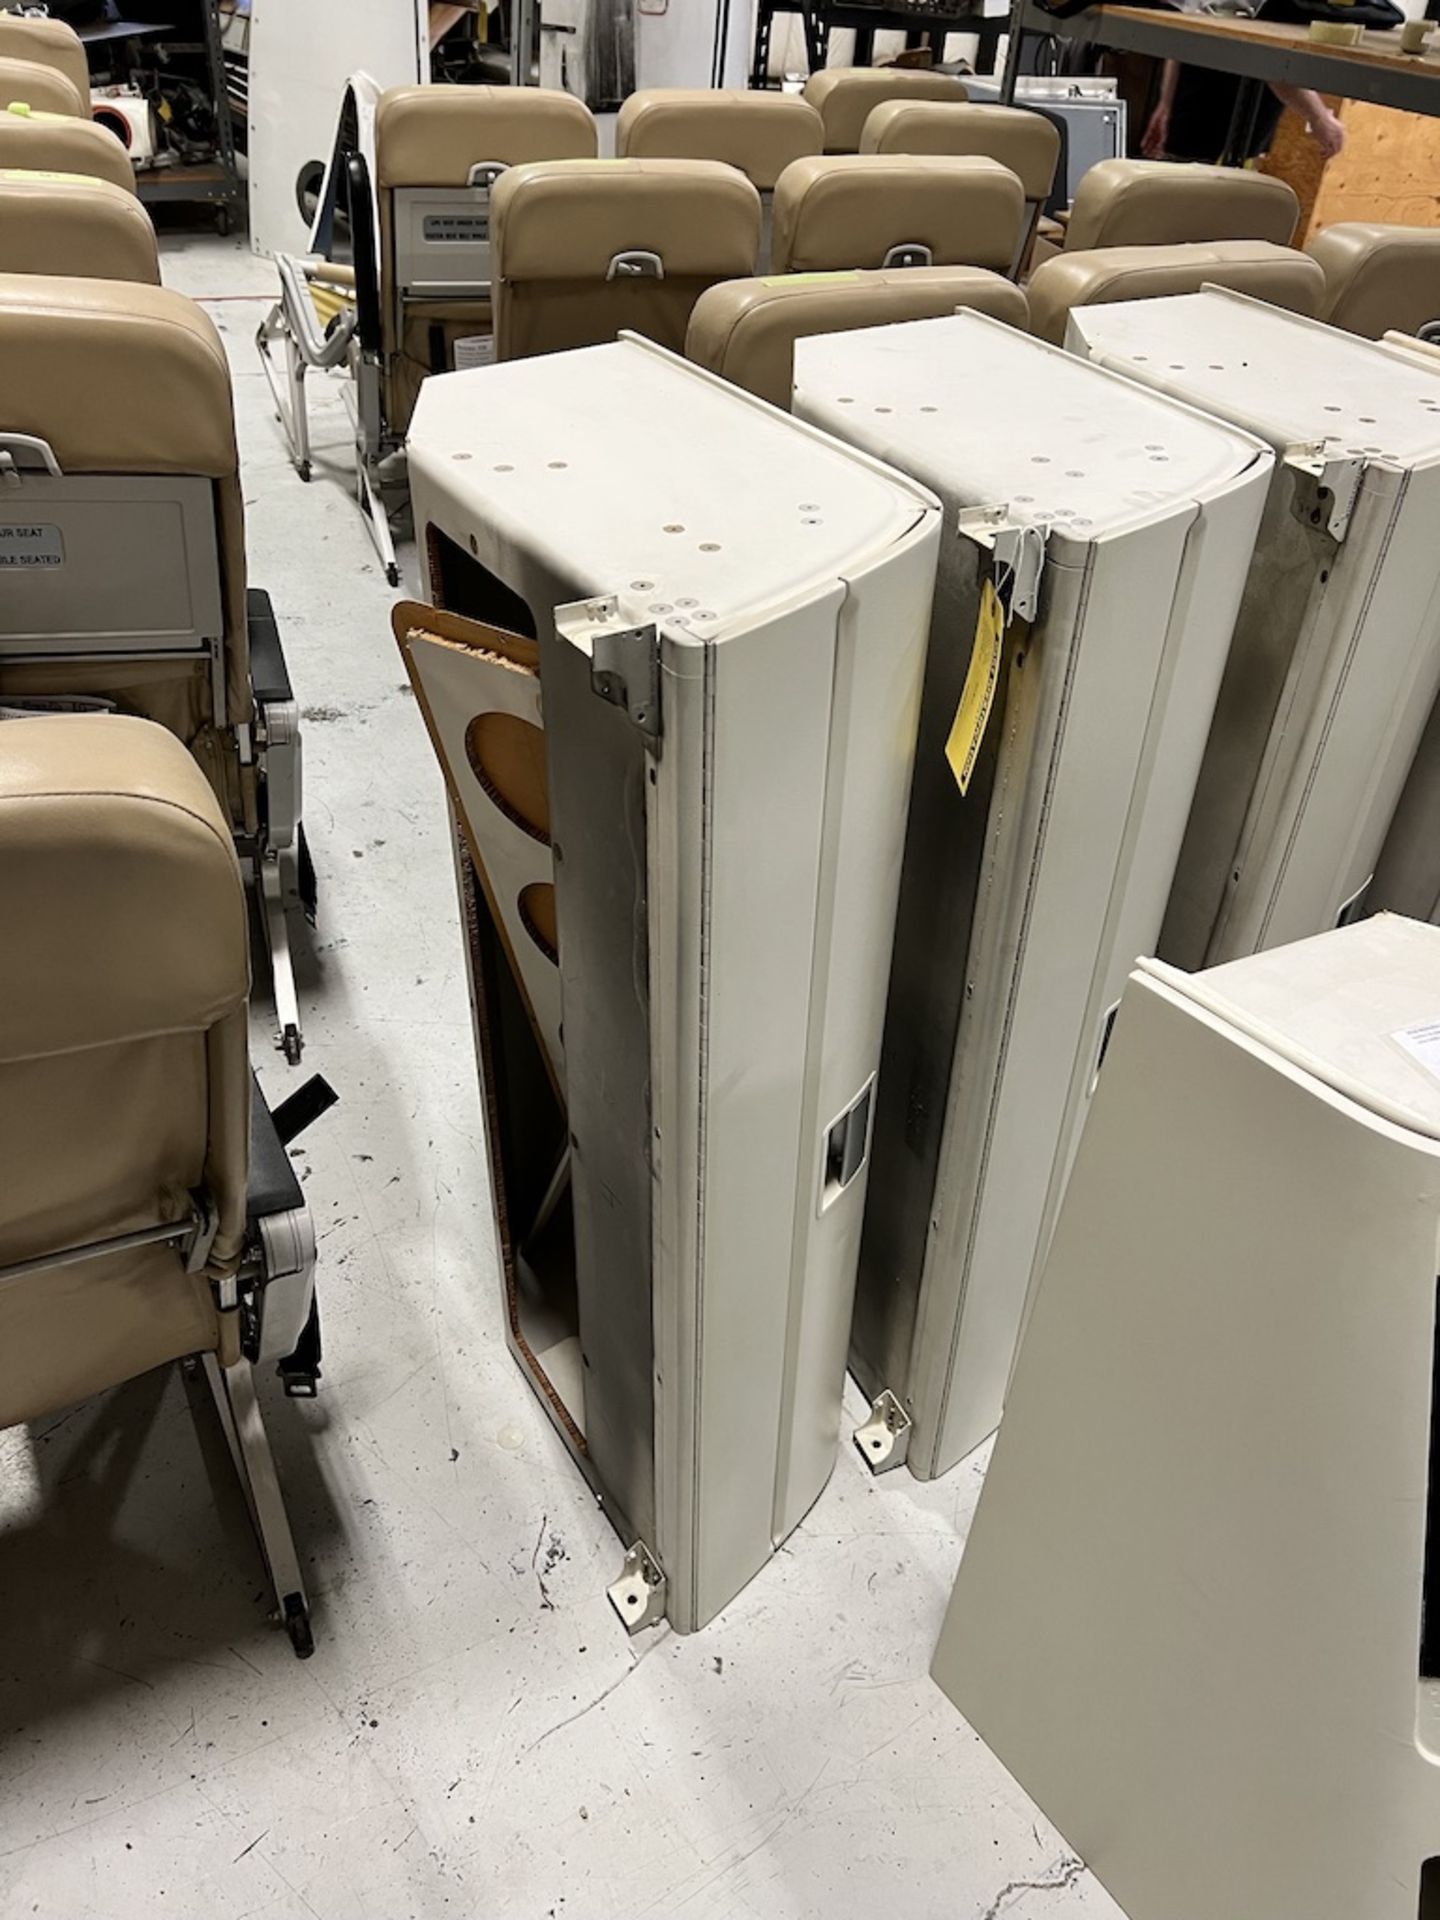 LOT OF: (30) SEATS, (1) FLIGHT ATTENDANT SEAT/ JUMP SEAT, (7) OVERHEAD LUGGAGE COMPARTMENTS AND (1) - Image 13 of 21